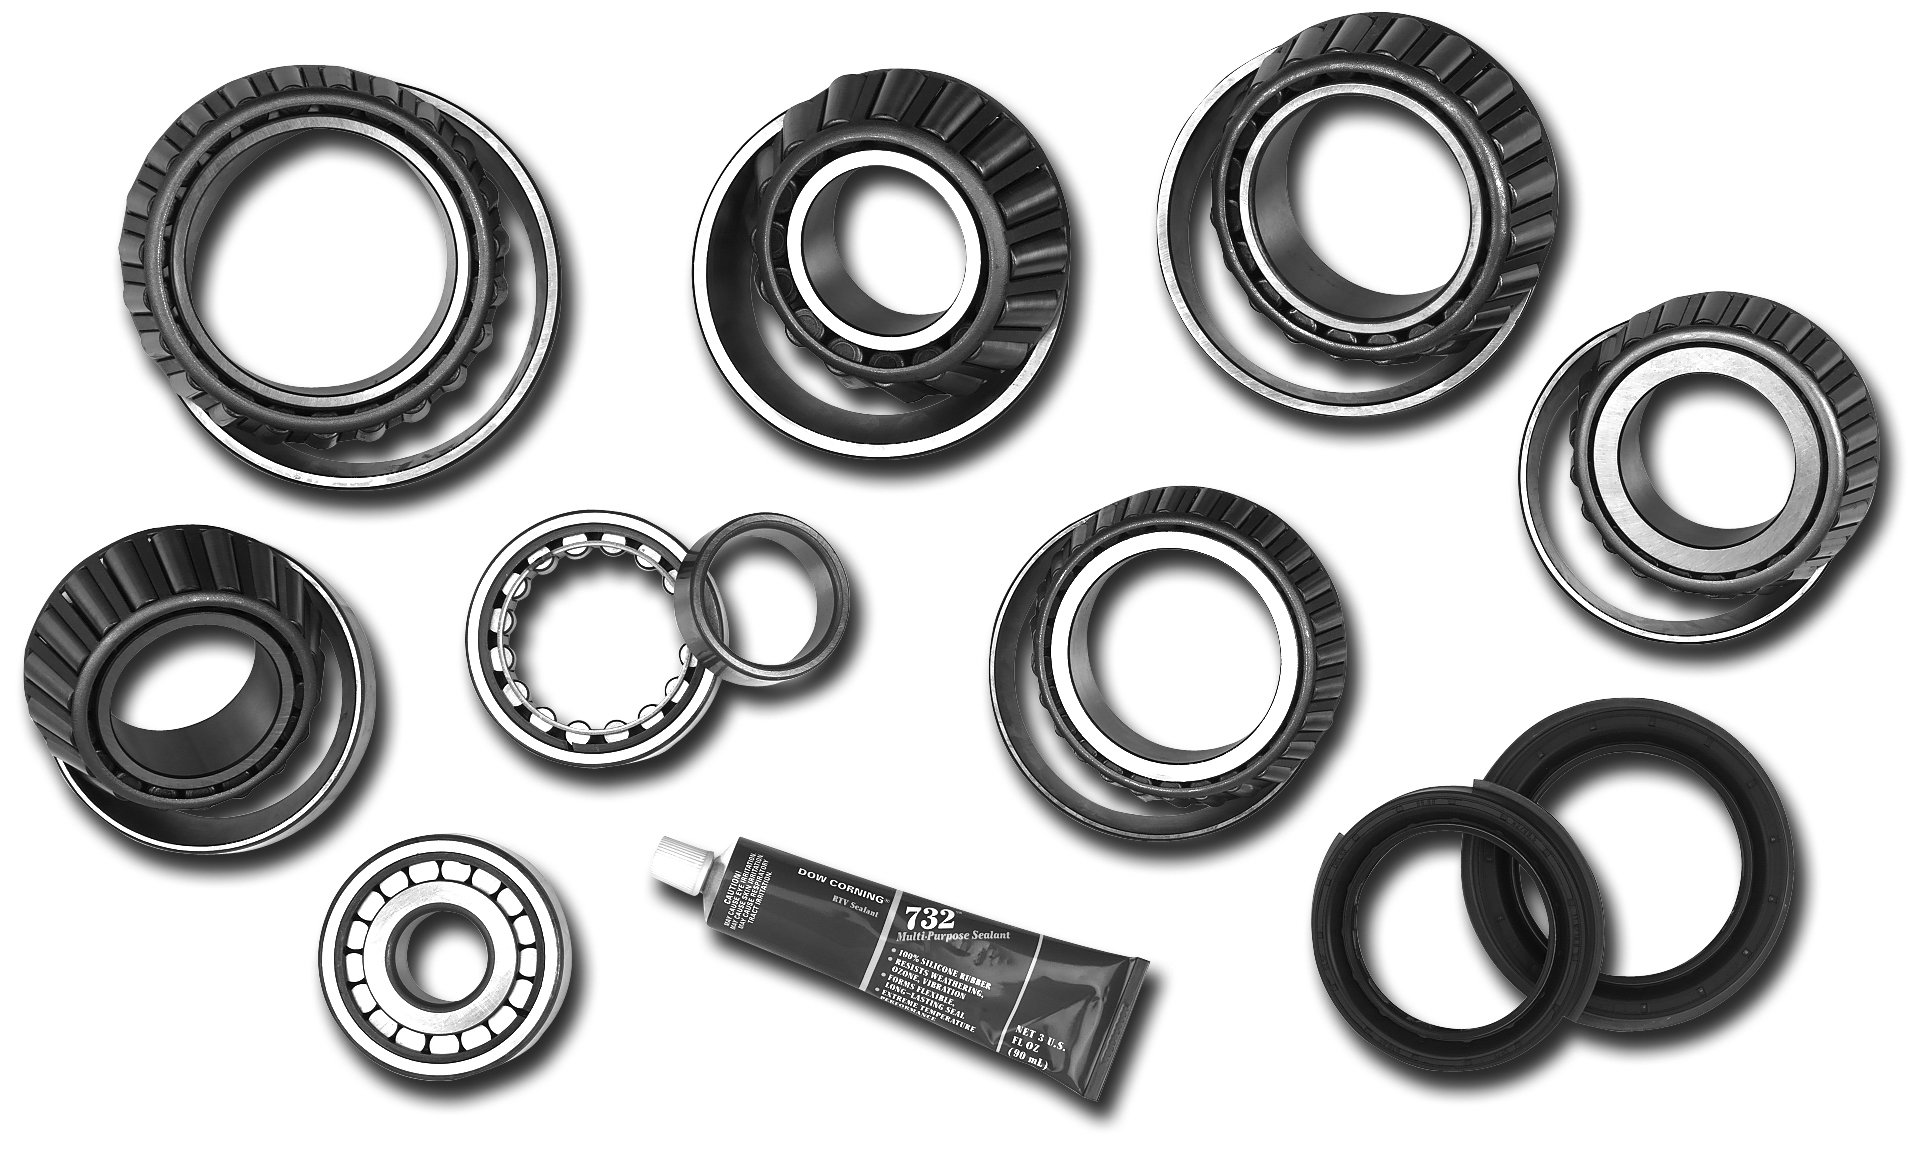 Dana Spicer 2017085 Axle Bearing Rebuild Kit for 03-06 Jeep Wrangler TJ &  Unlimited Rubicon with Dana 44 Front or Rear Axle | Quadratec